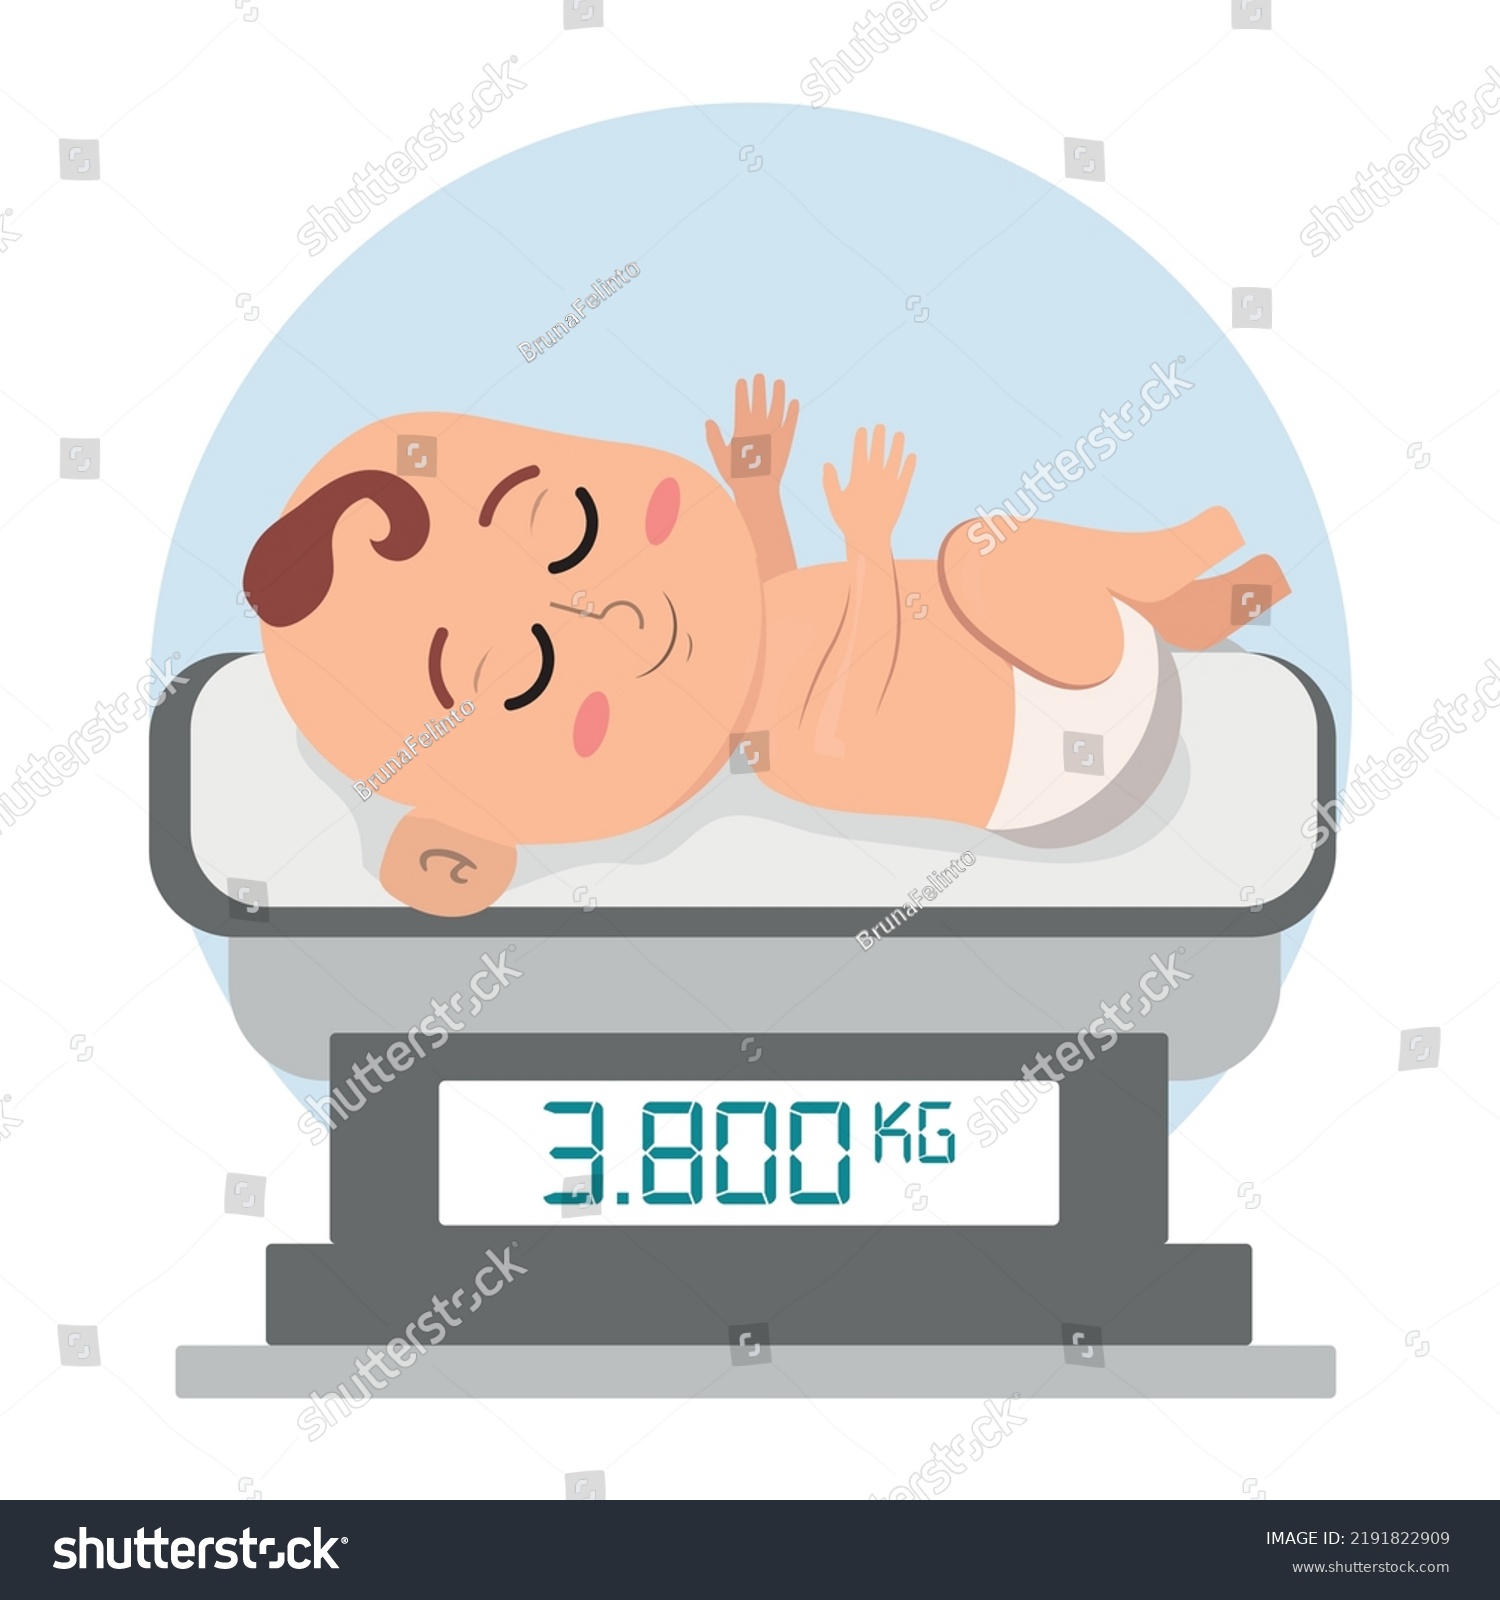 SVG of Weight scale for children icon, digital scales measure weight in kilograms. svg